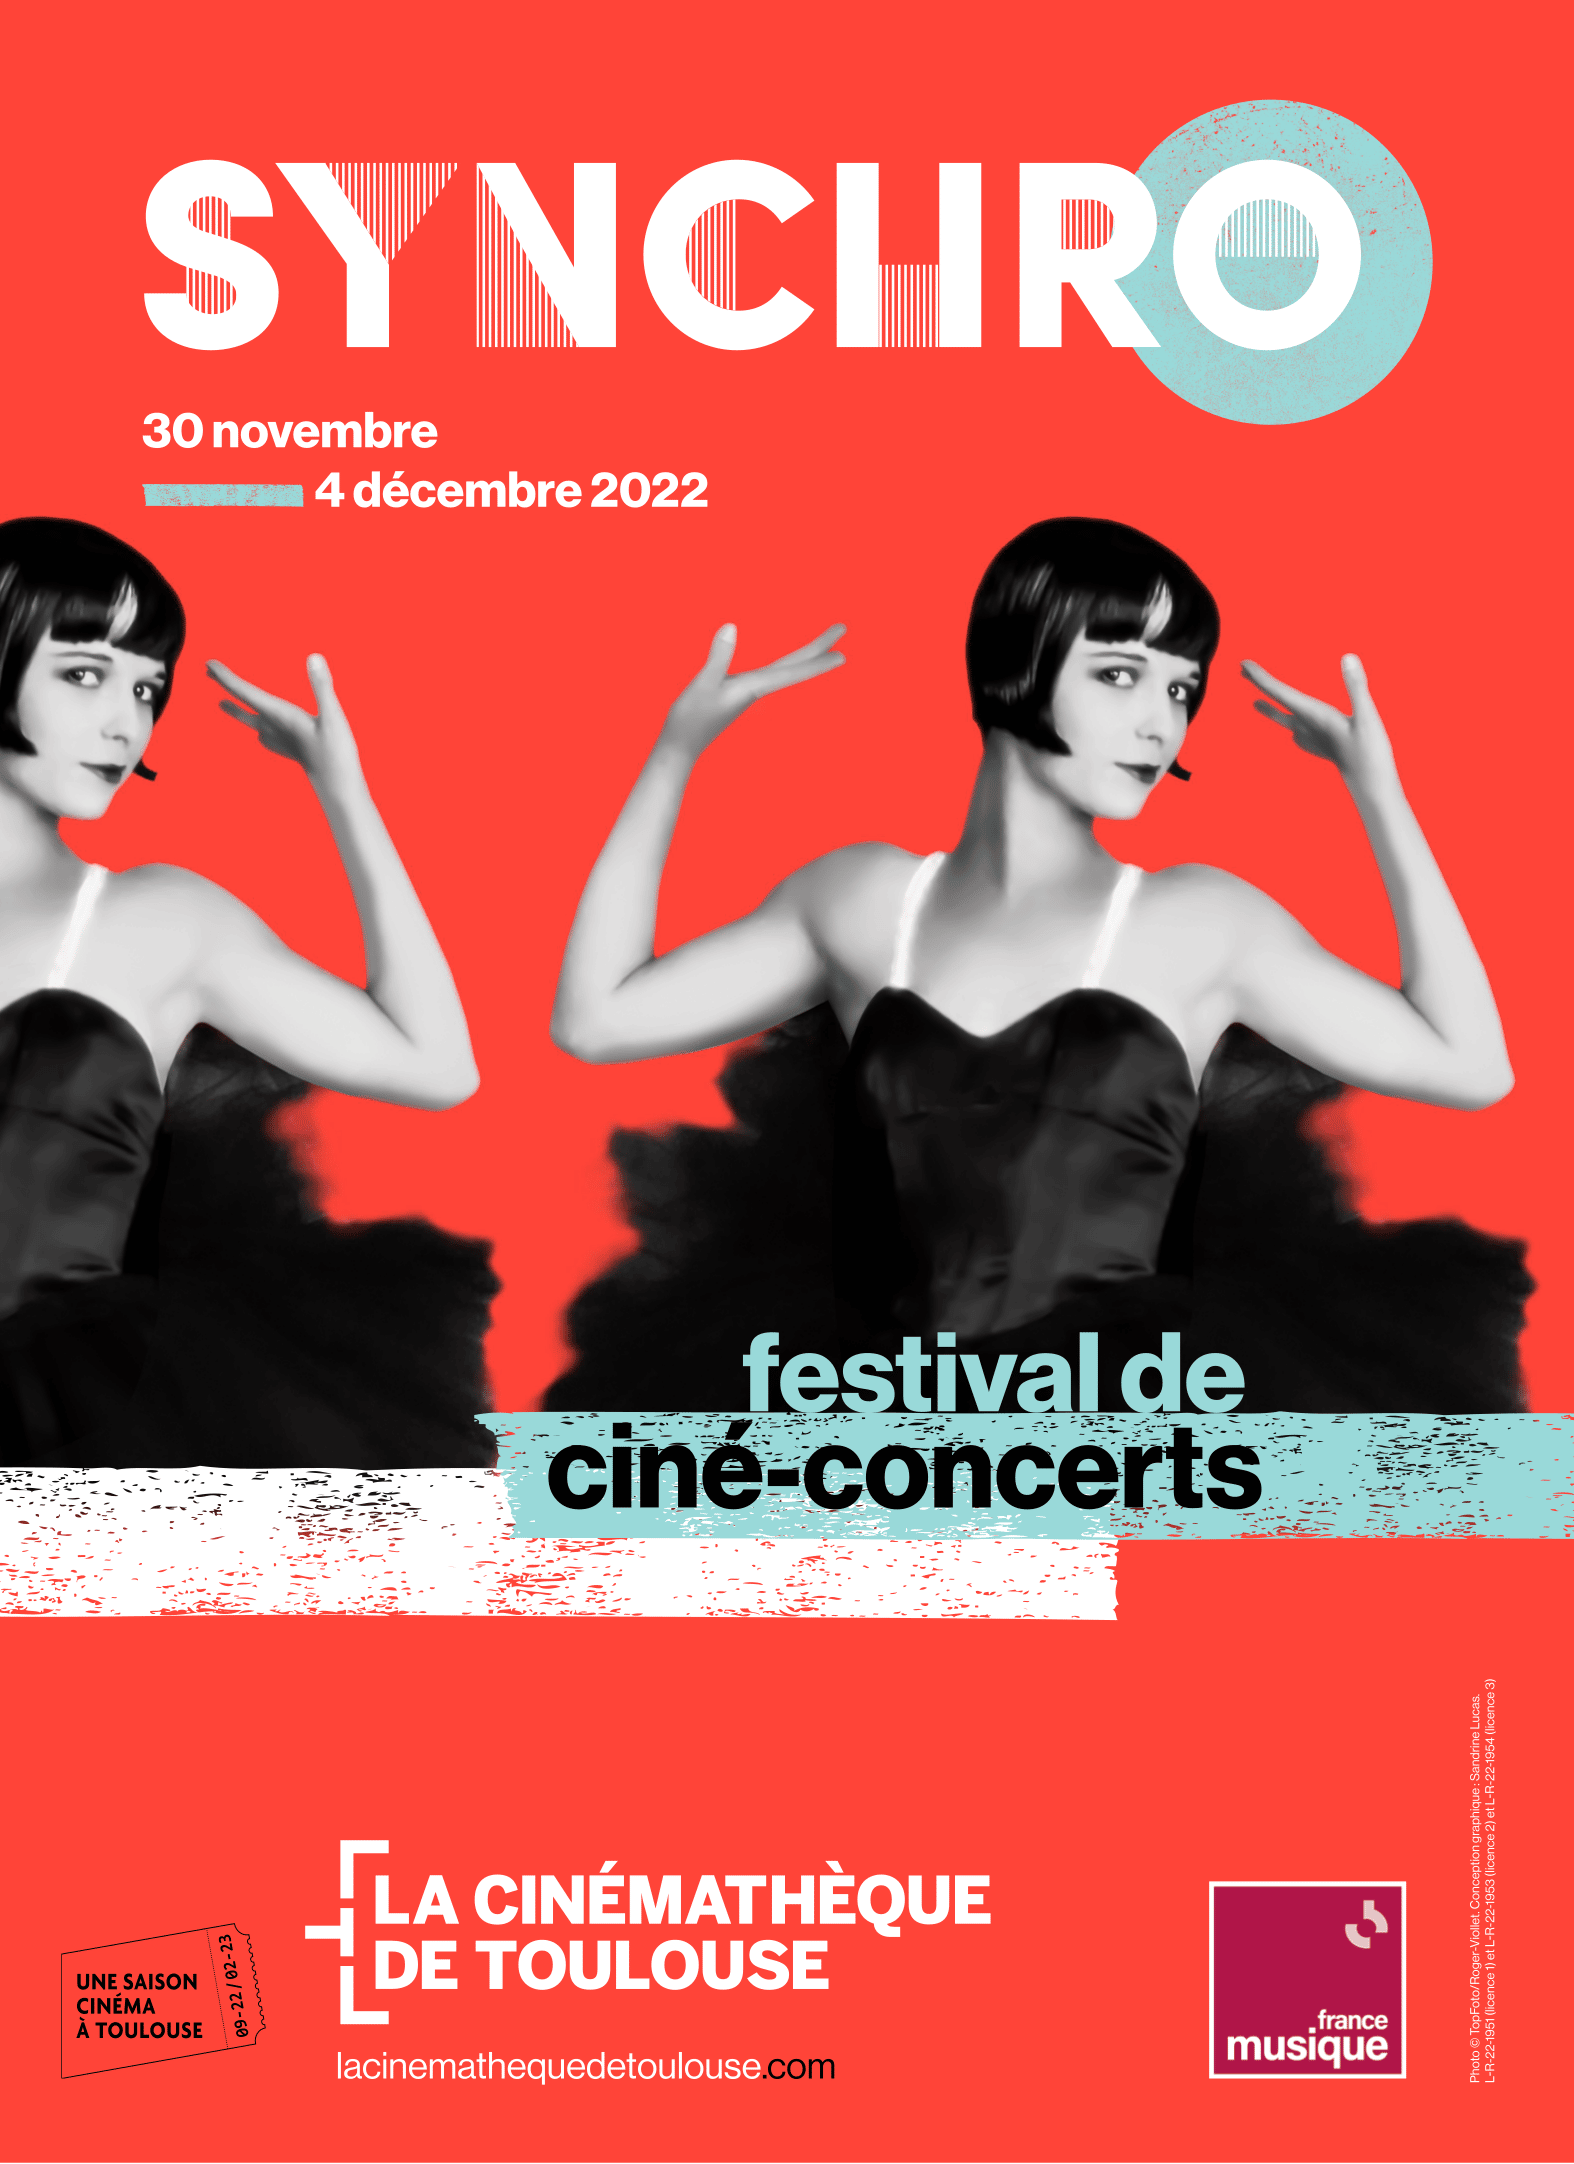 Film Festival Concert in Toulouse!